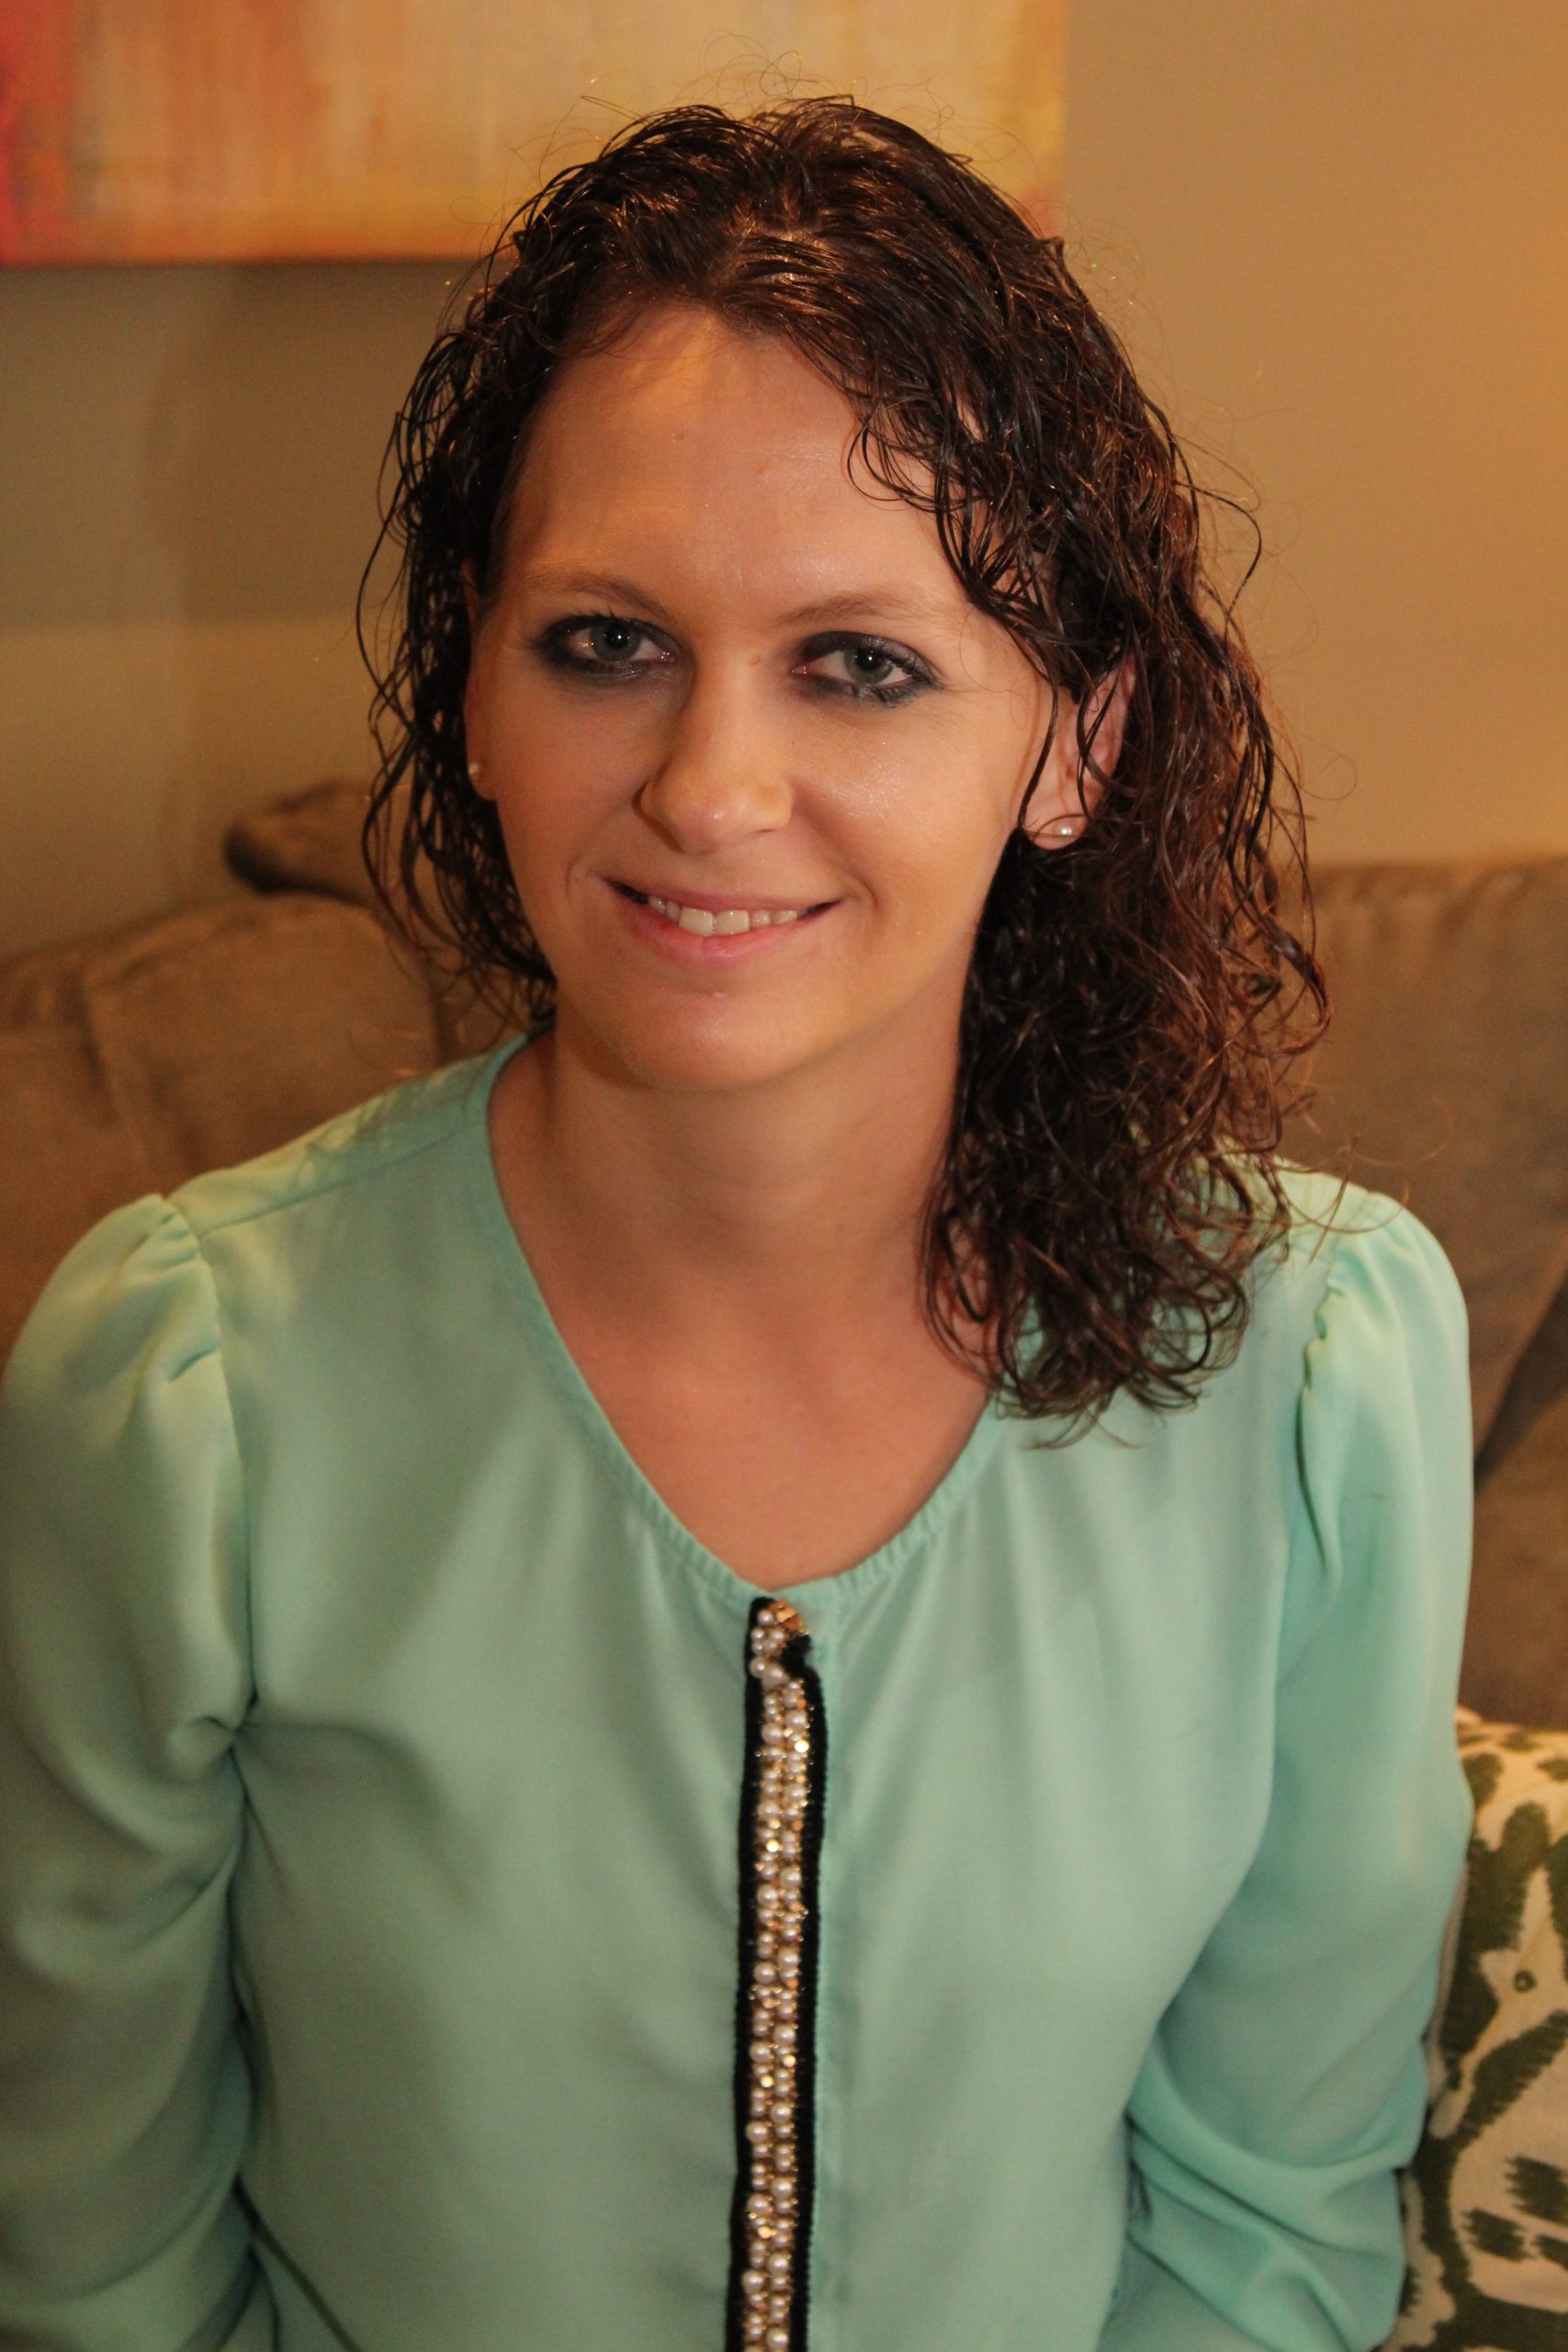 Counseling intern Candice Hoke joins us to offer low-cost therapy services!